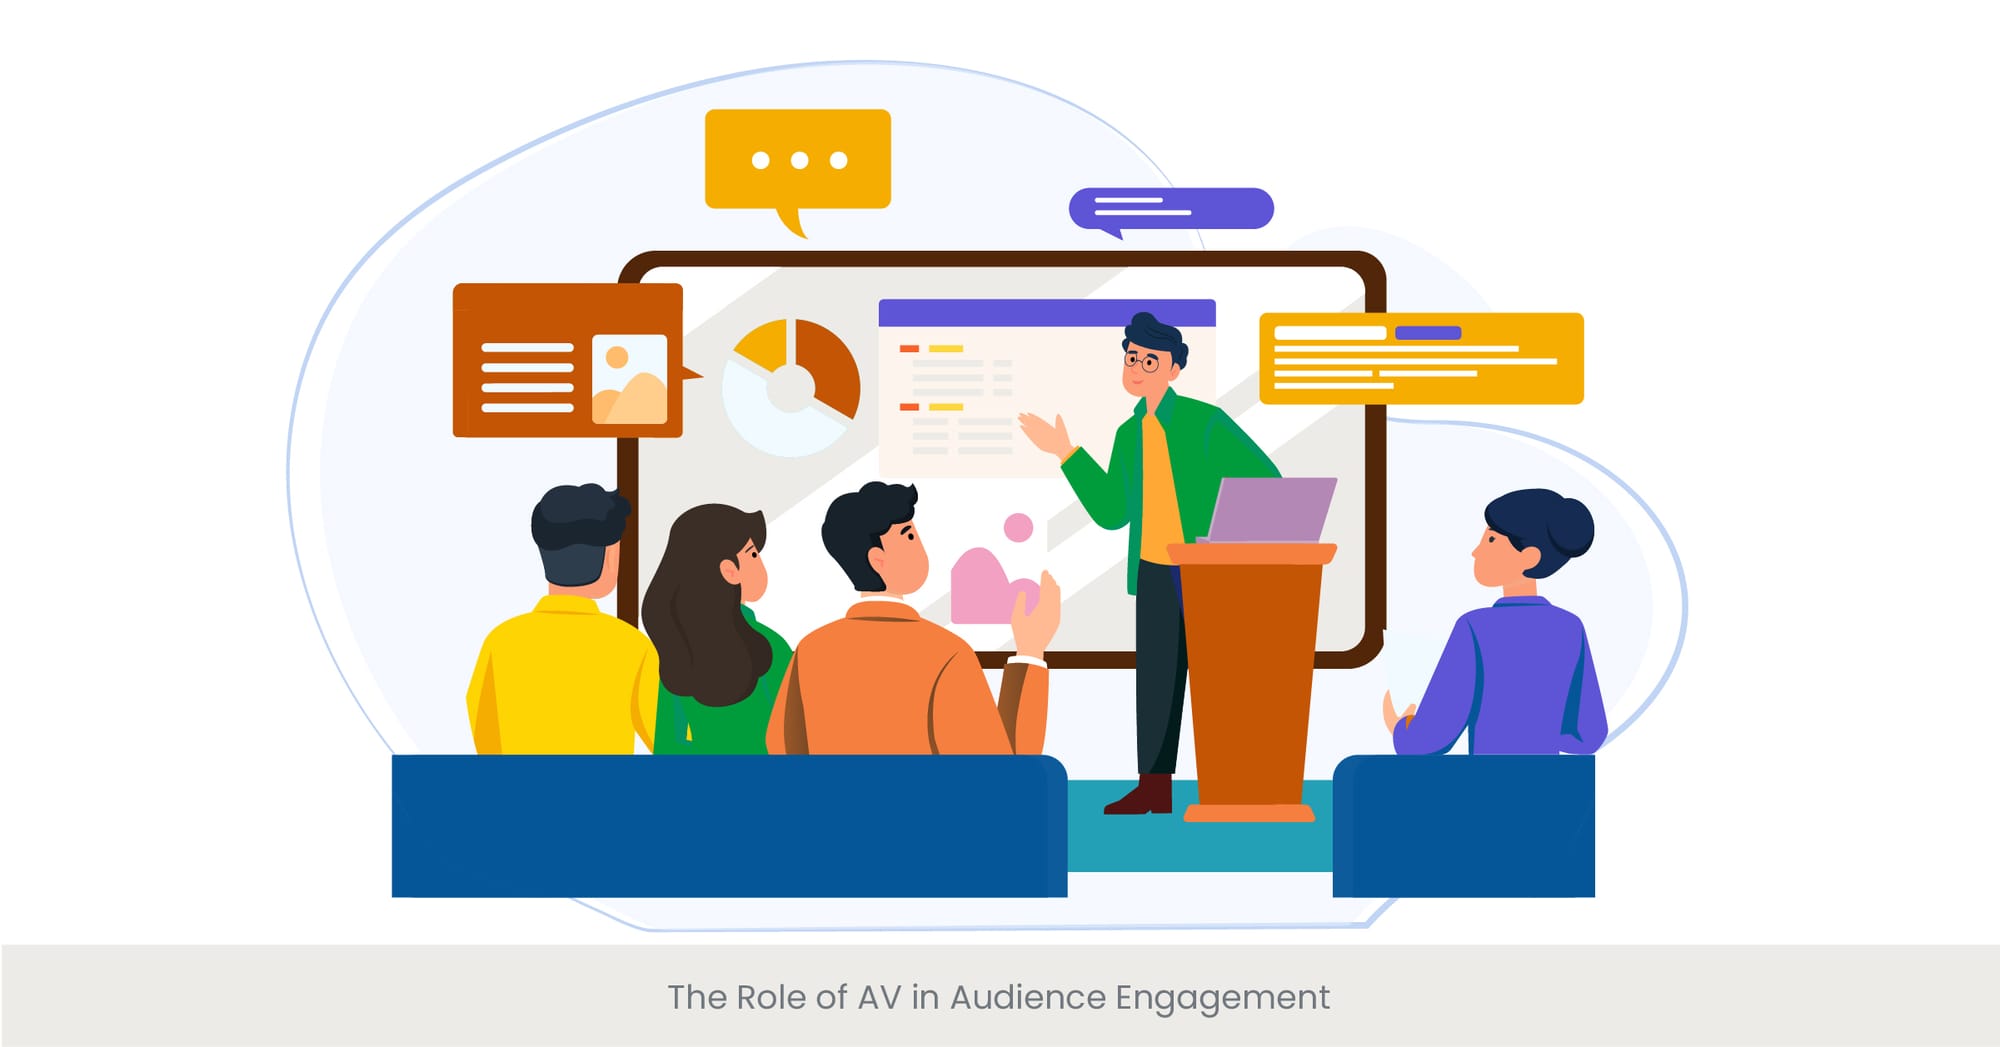 The Role of AV in Audience Engagement